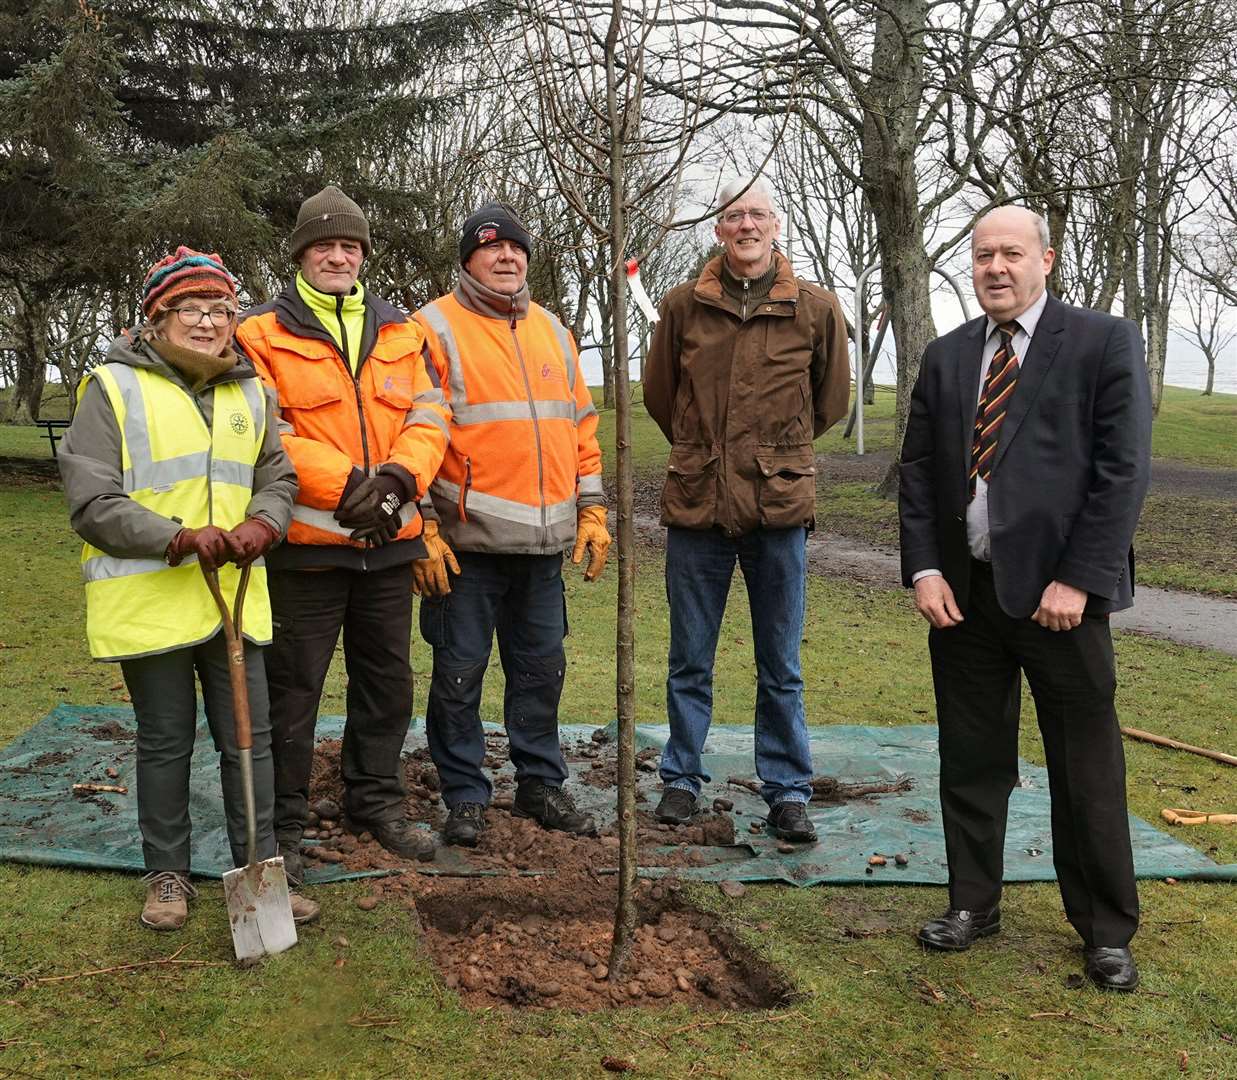 Alison Hall, Declan Flynn (President-elect) and Laurie Fraser, together with Highland Council employees who greatly assisted with the planting.